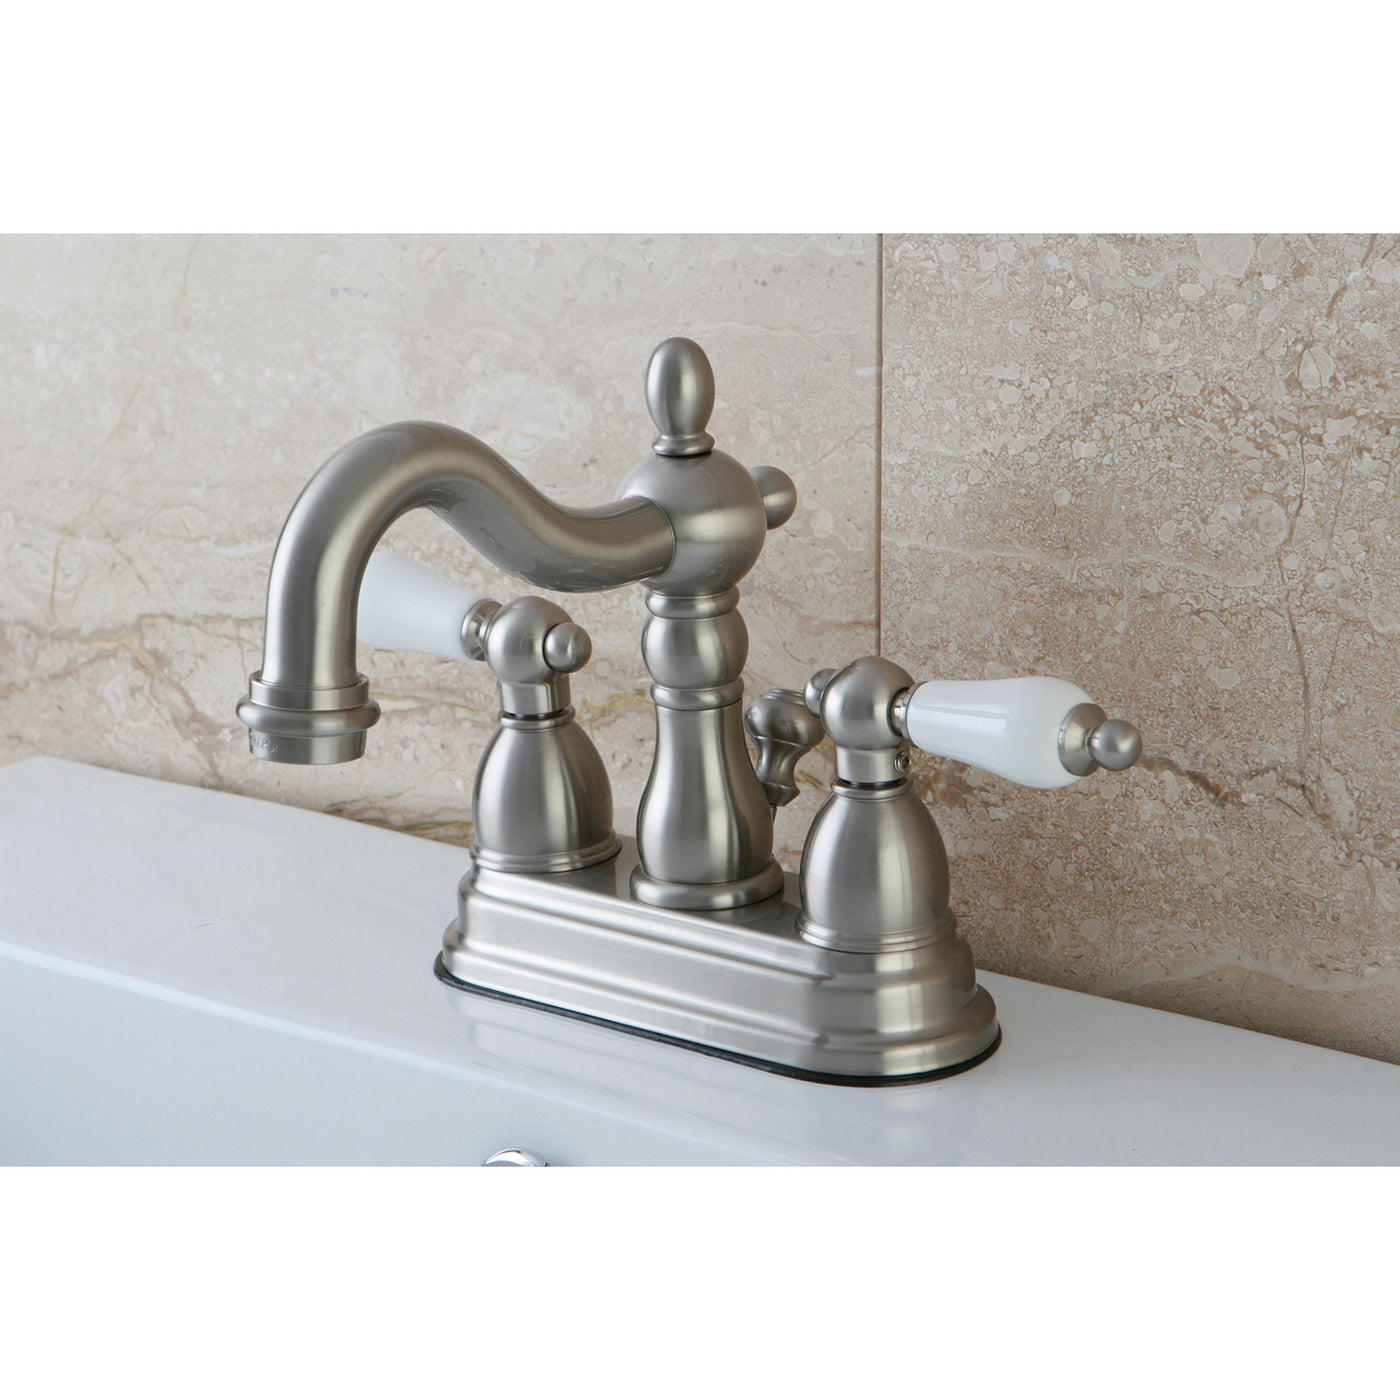 Elements of Design EB1608PL 4-Inch Centerset Bathroom Faucet with Plastic Pop-Up, Brushed Nickel